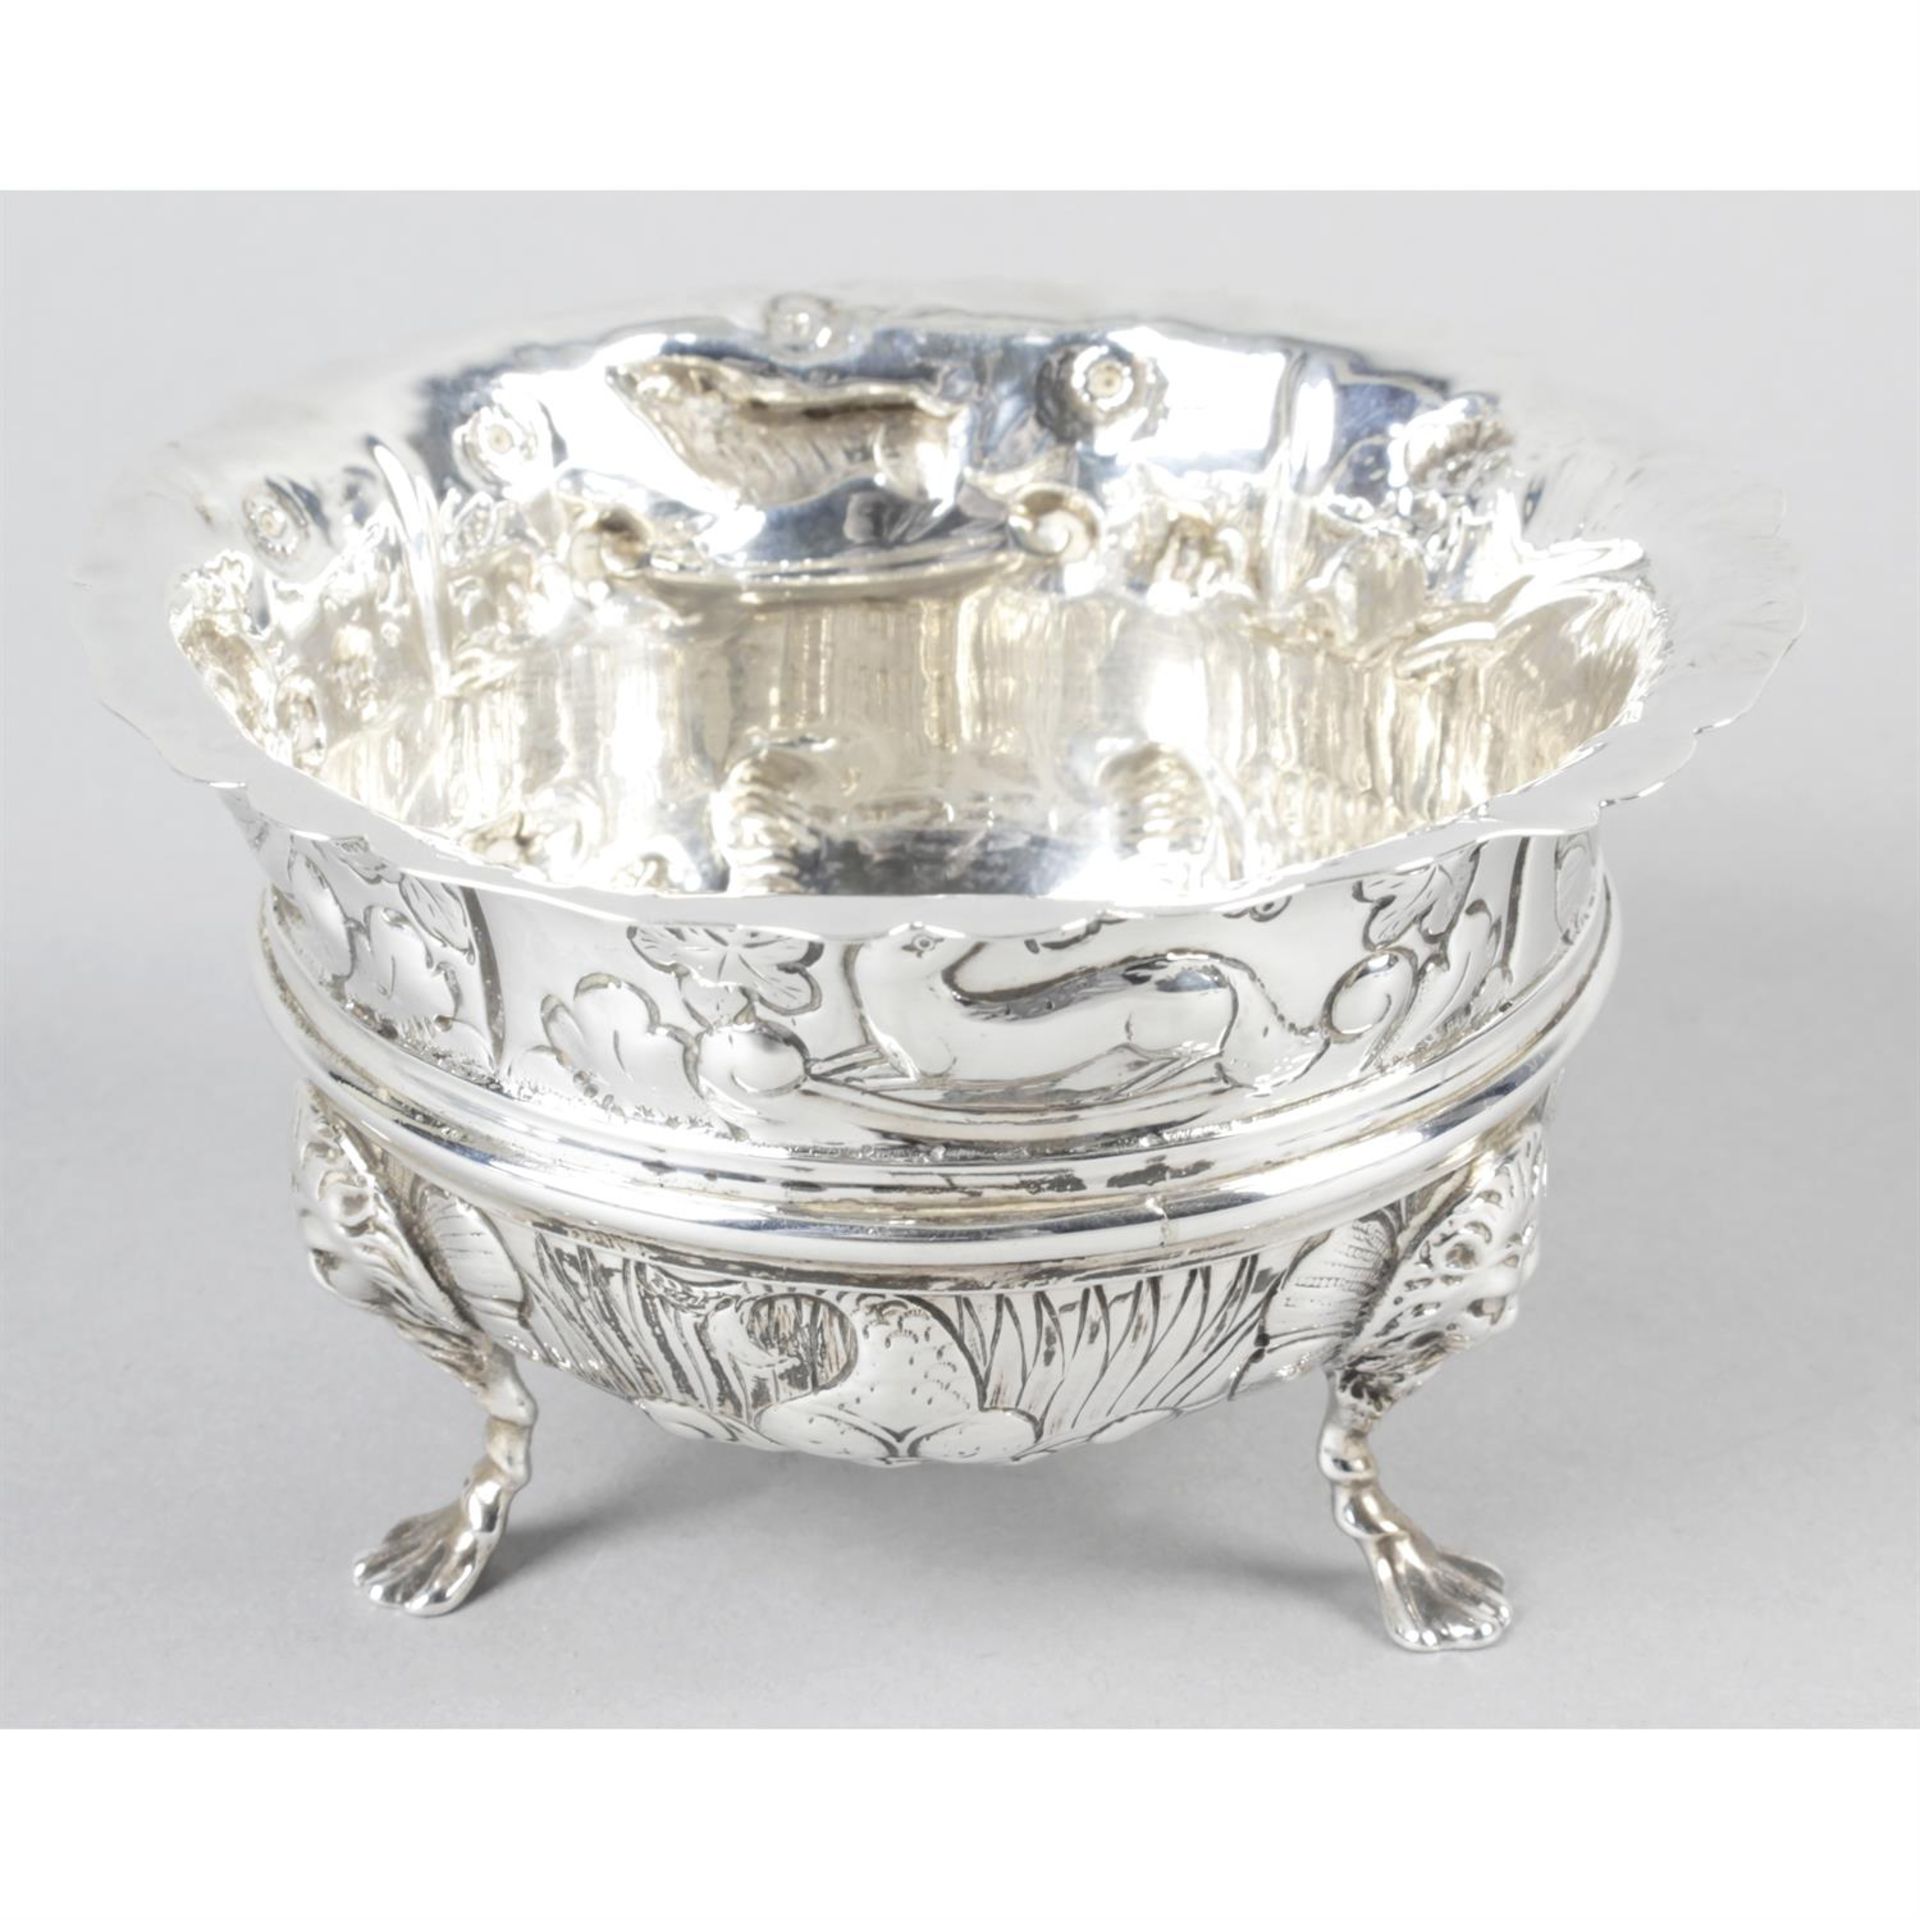 A small Edwardian silver embossed bowl.